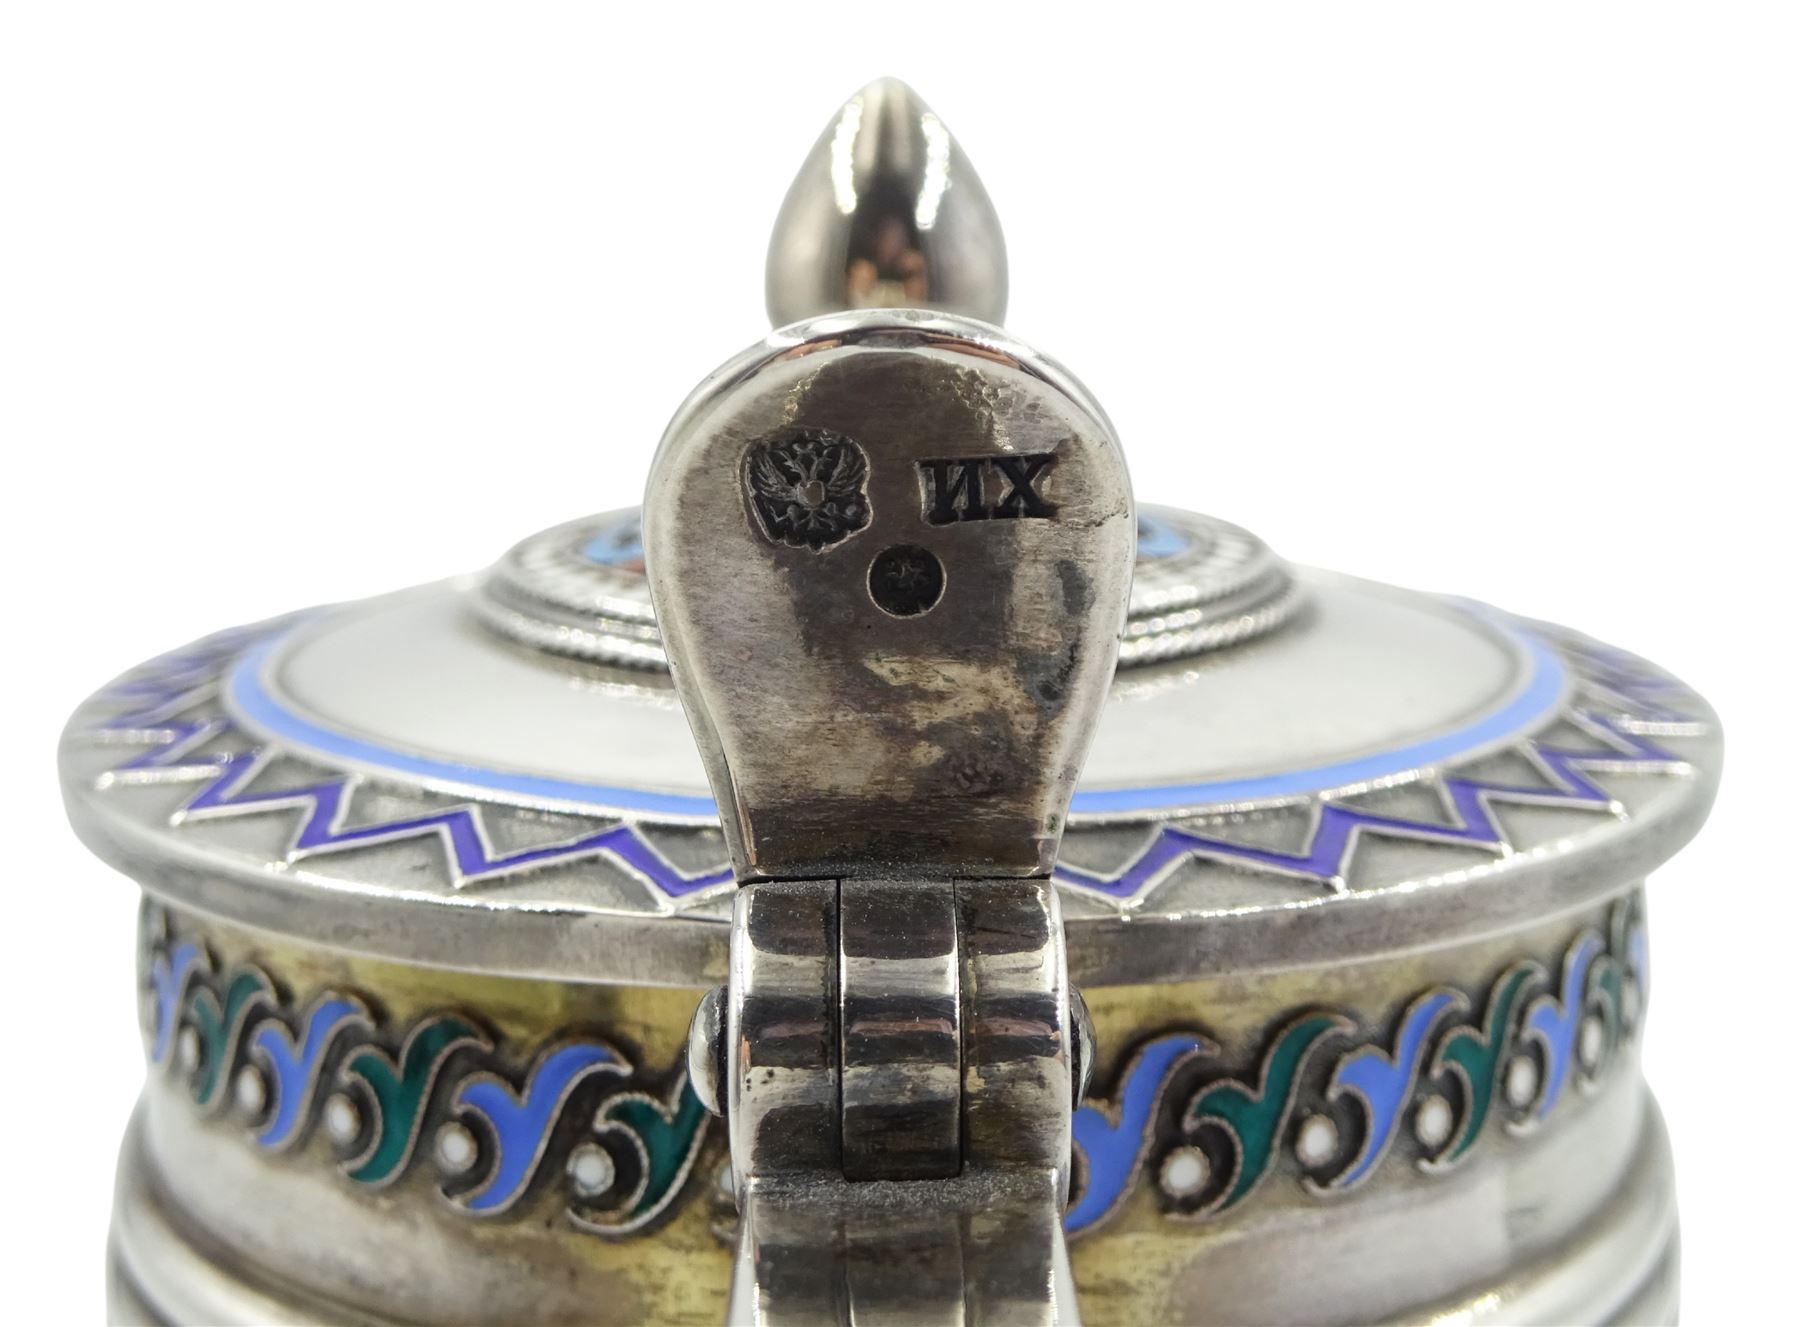 19th century Russian silver lidded jug - Image 3 of 4